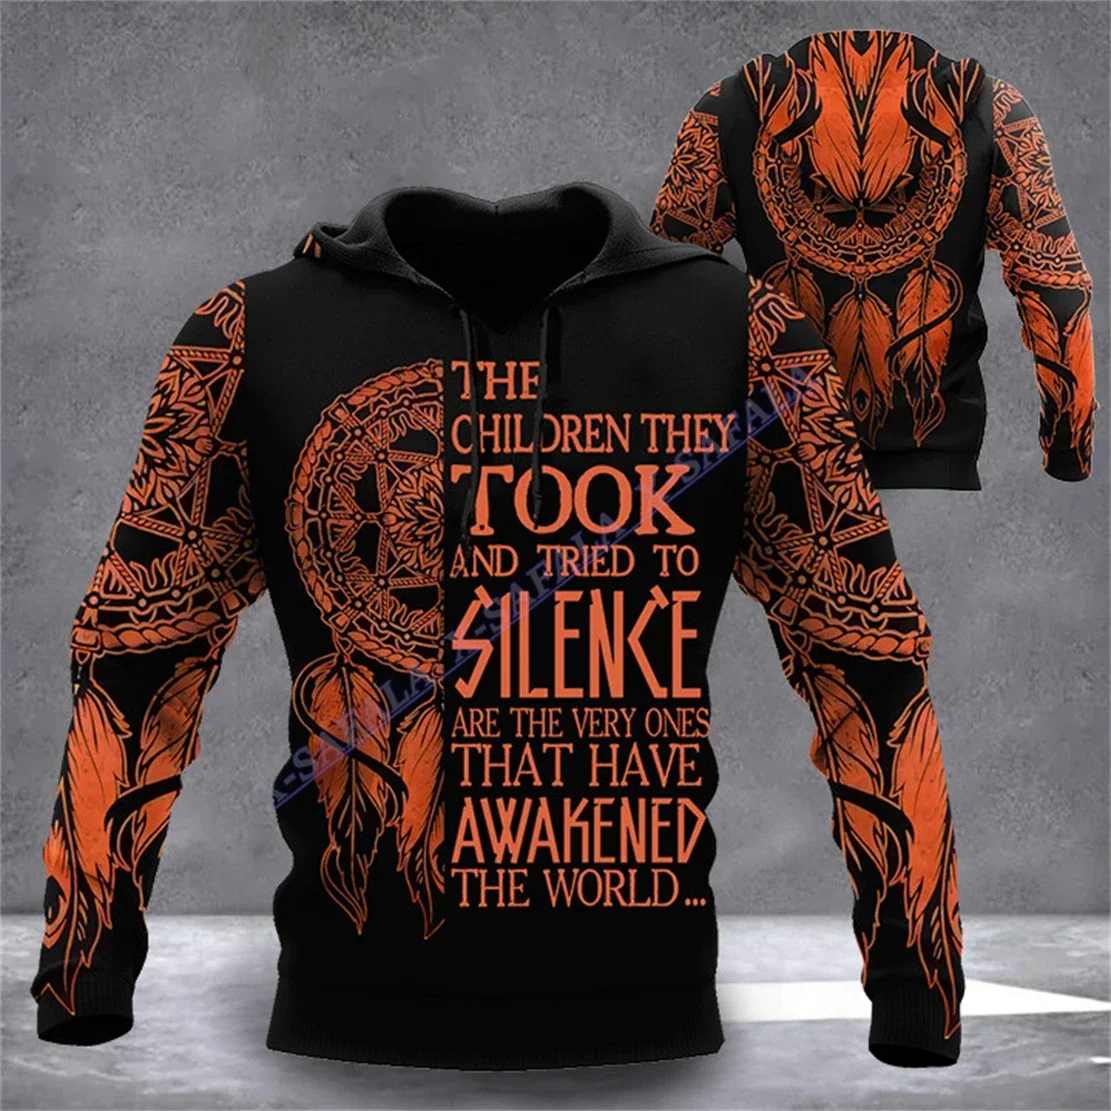 

Native Pattern Canada Every Child Matters 3D Printed Hoodie Men Women Pullover Sweatshirt Jersey Tracksuits Jumper